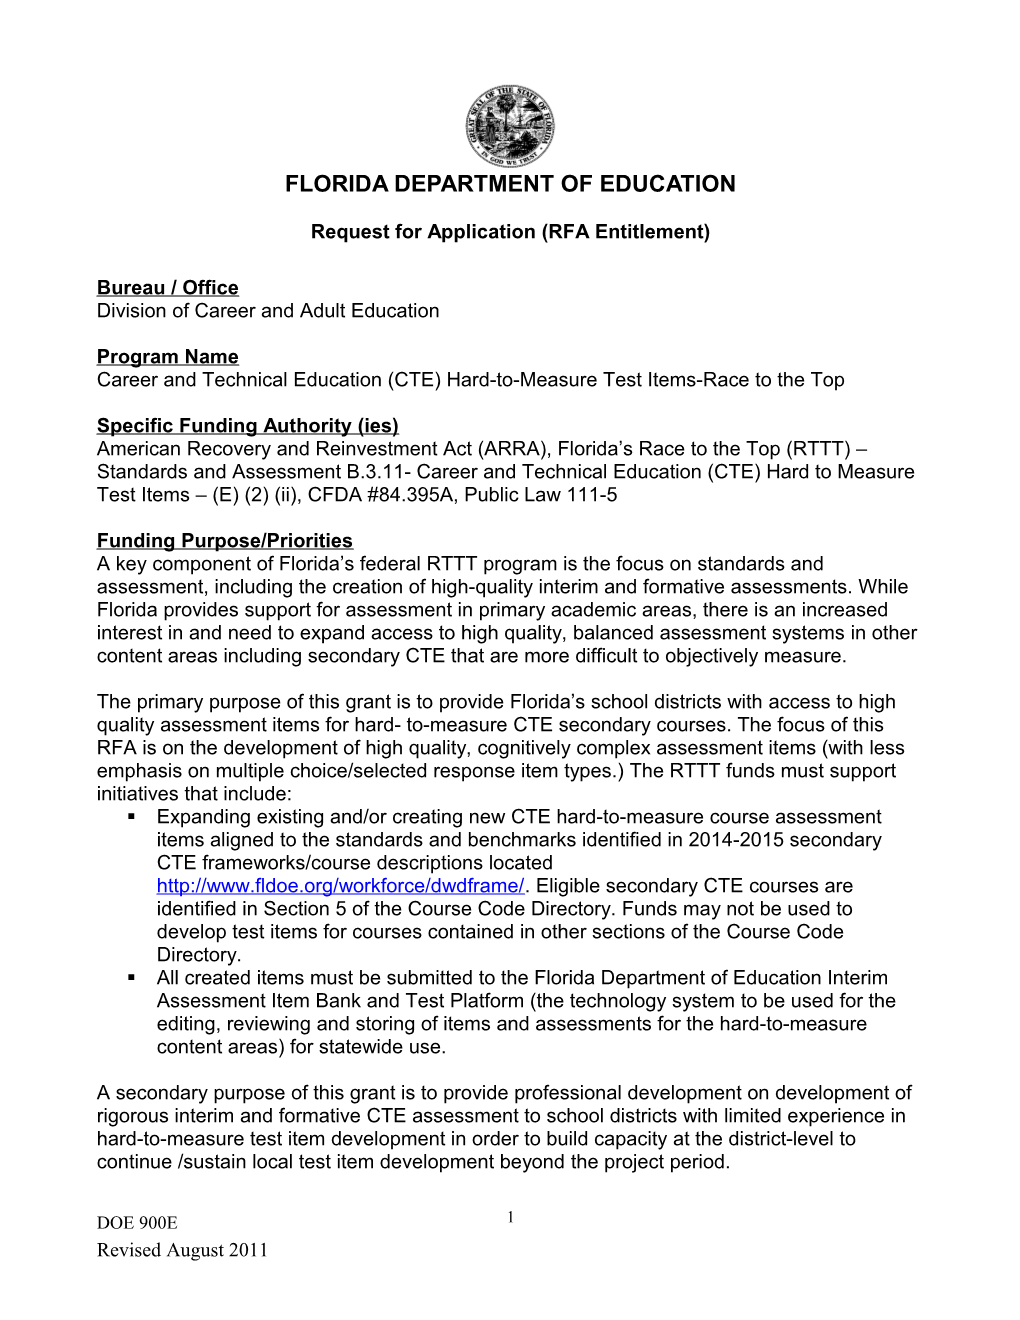 Florida Department of Education s8